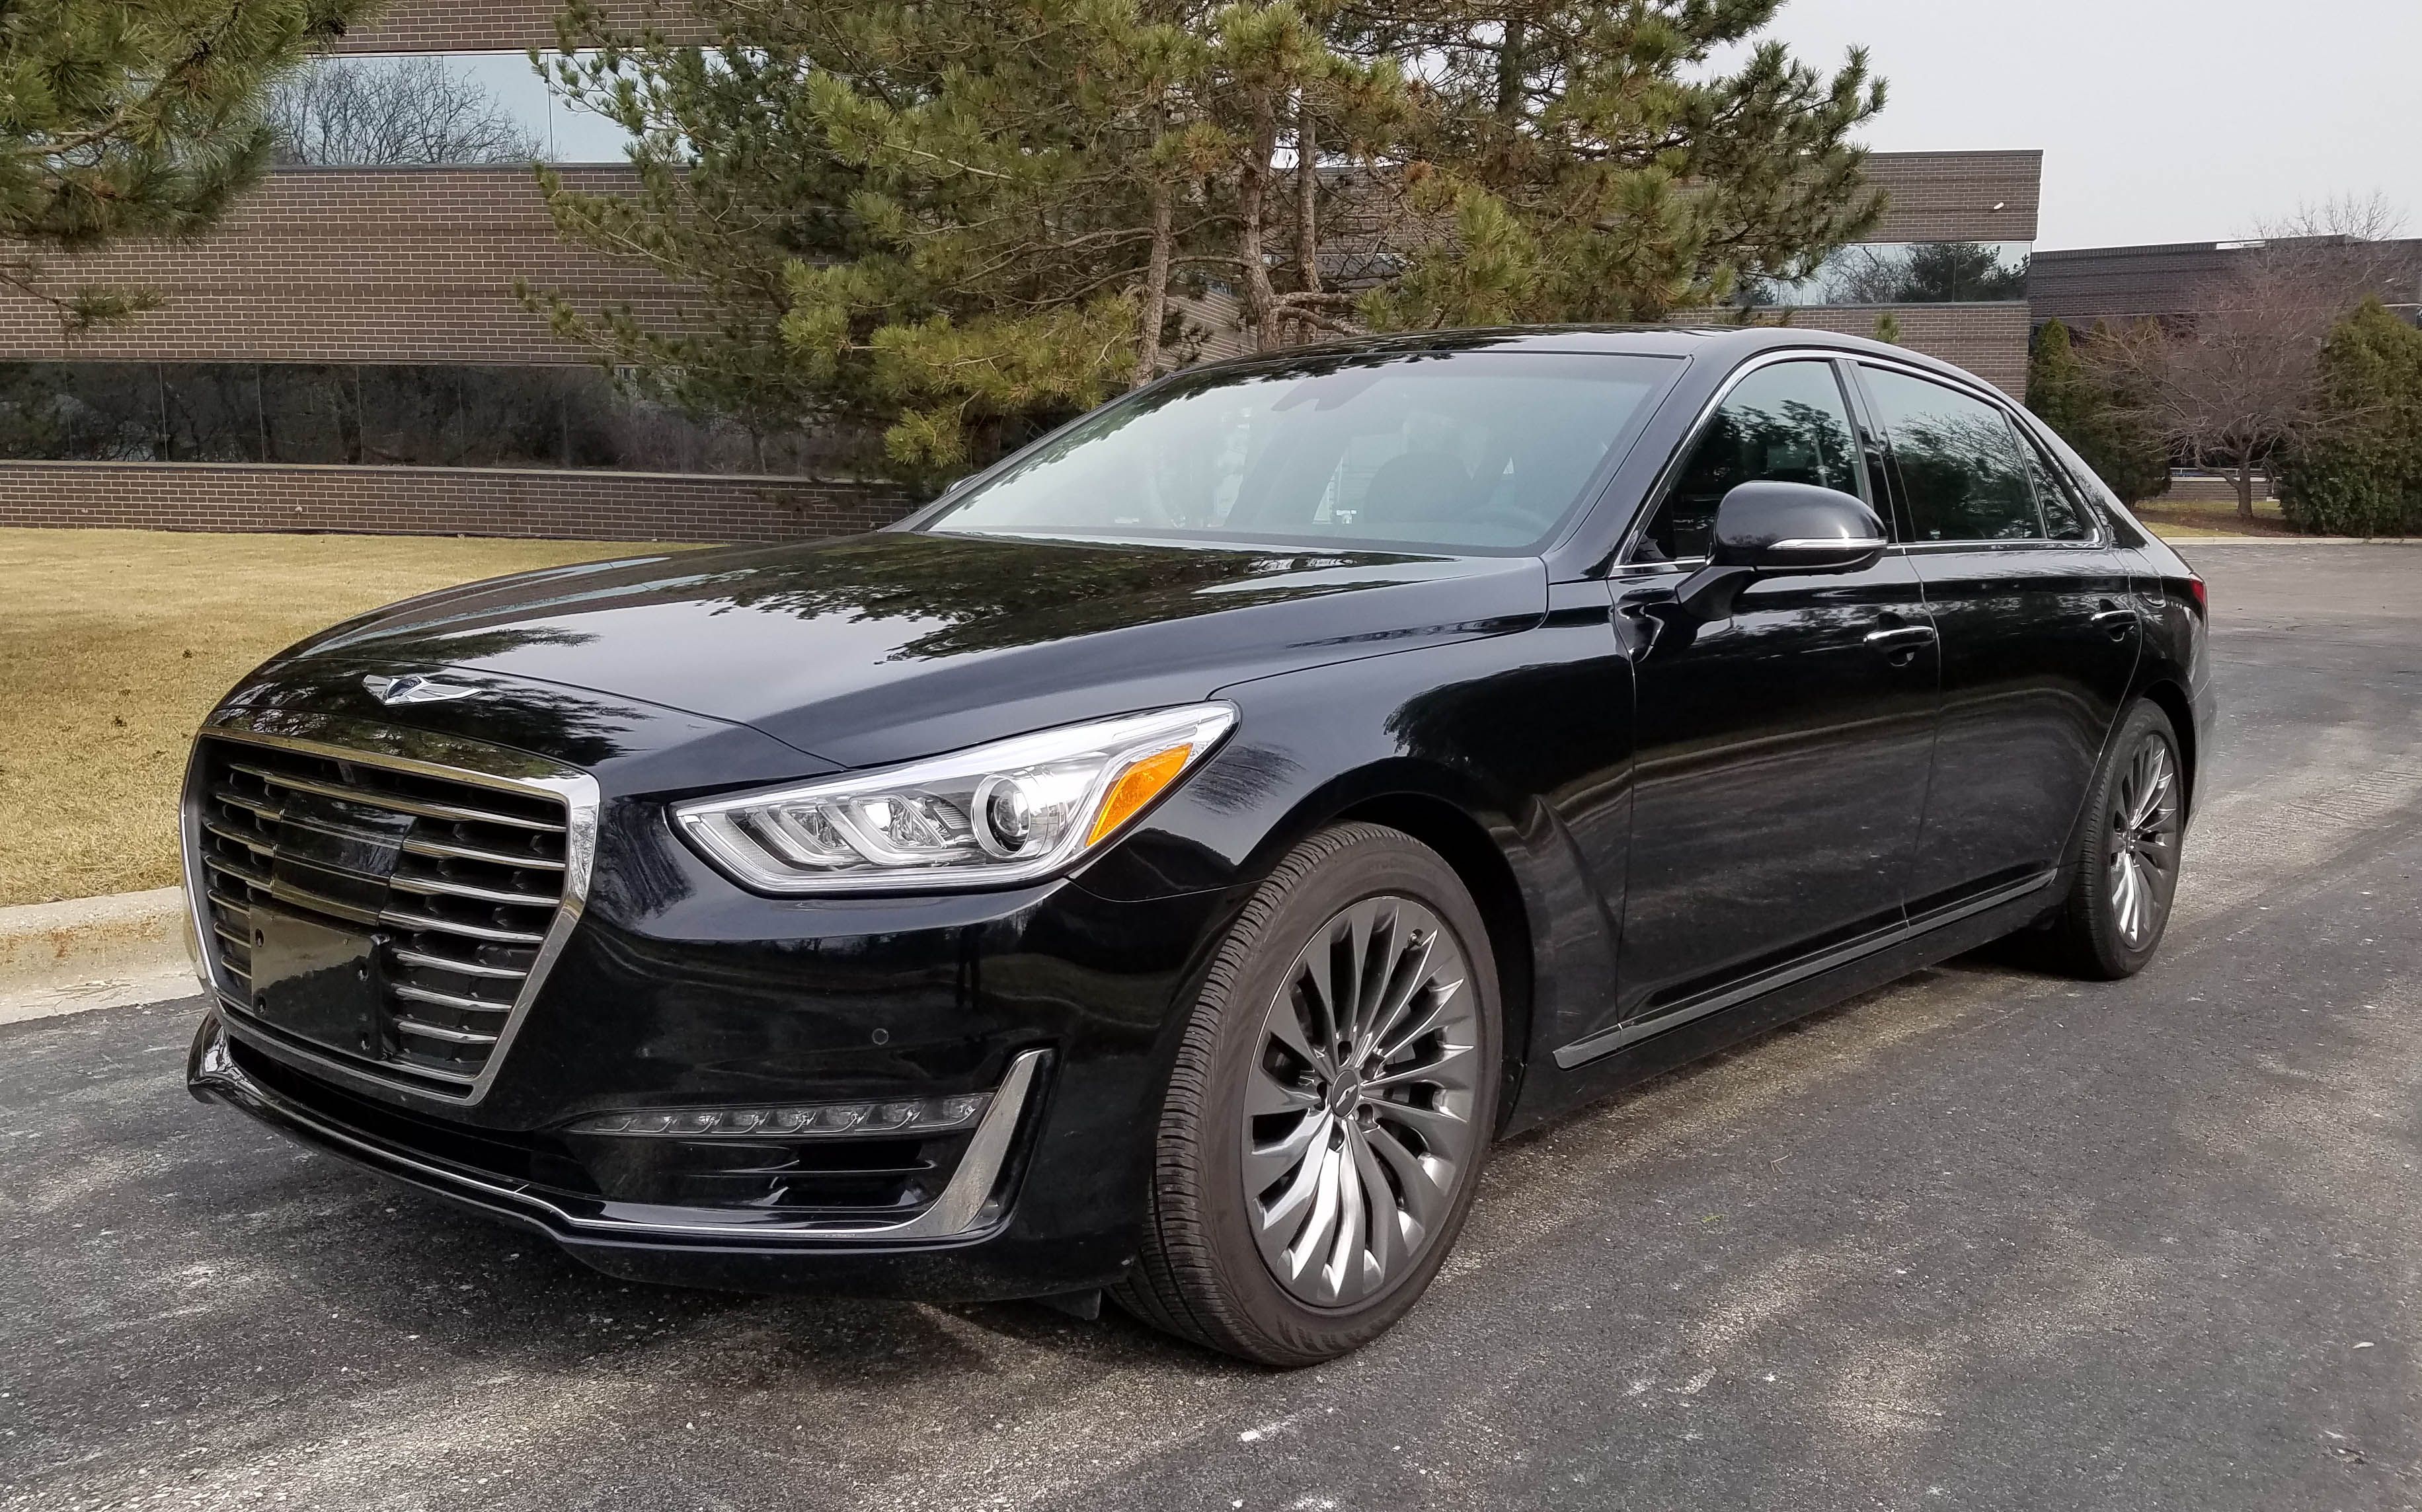 Genesis G90 5.0 Ultimate parked outside